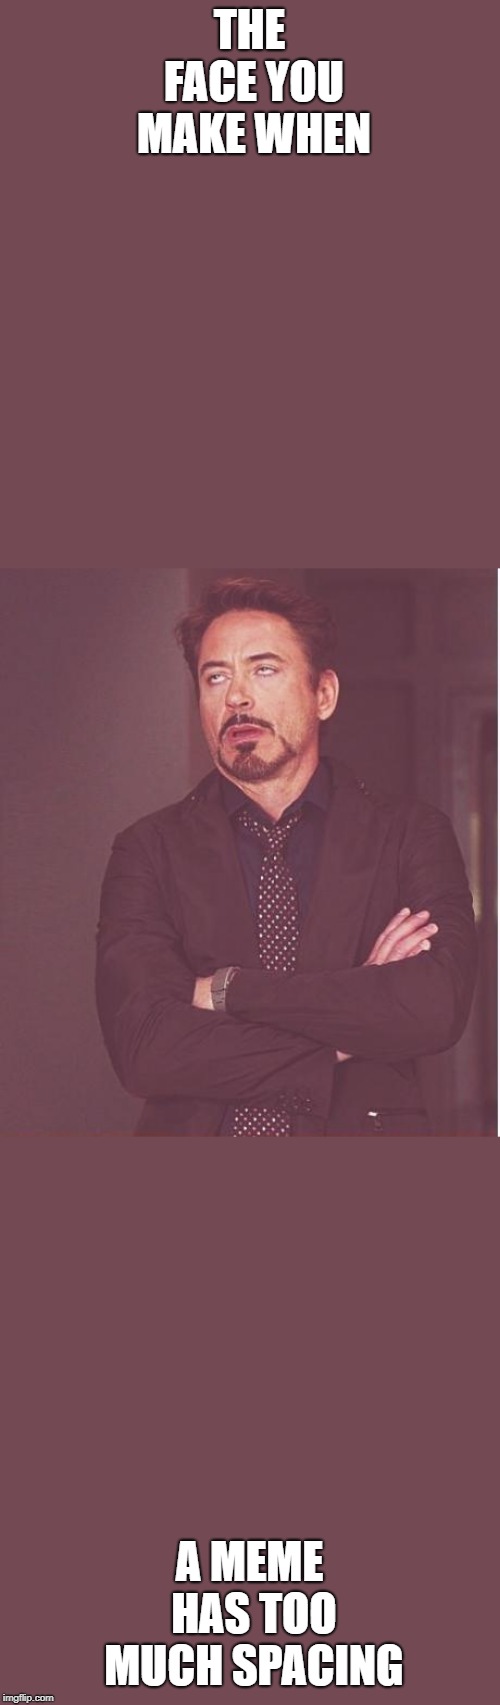 Face You Make Robert Downey Jr | THE FACE YOU MAKE WHEN; A MEME HAS TOO MUCH SPACING | image tagged in memes,face you make robert downey jr | made w/ Imgflip meme maker